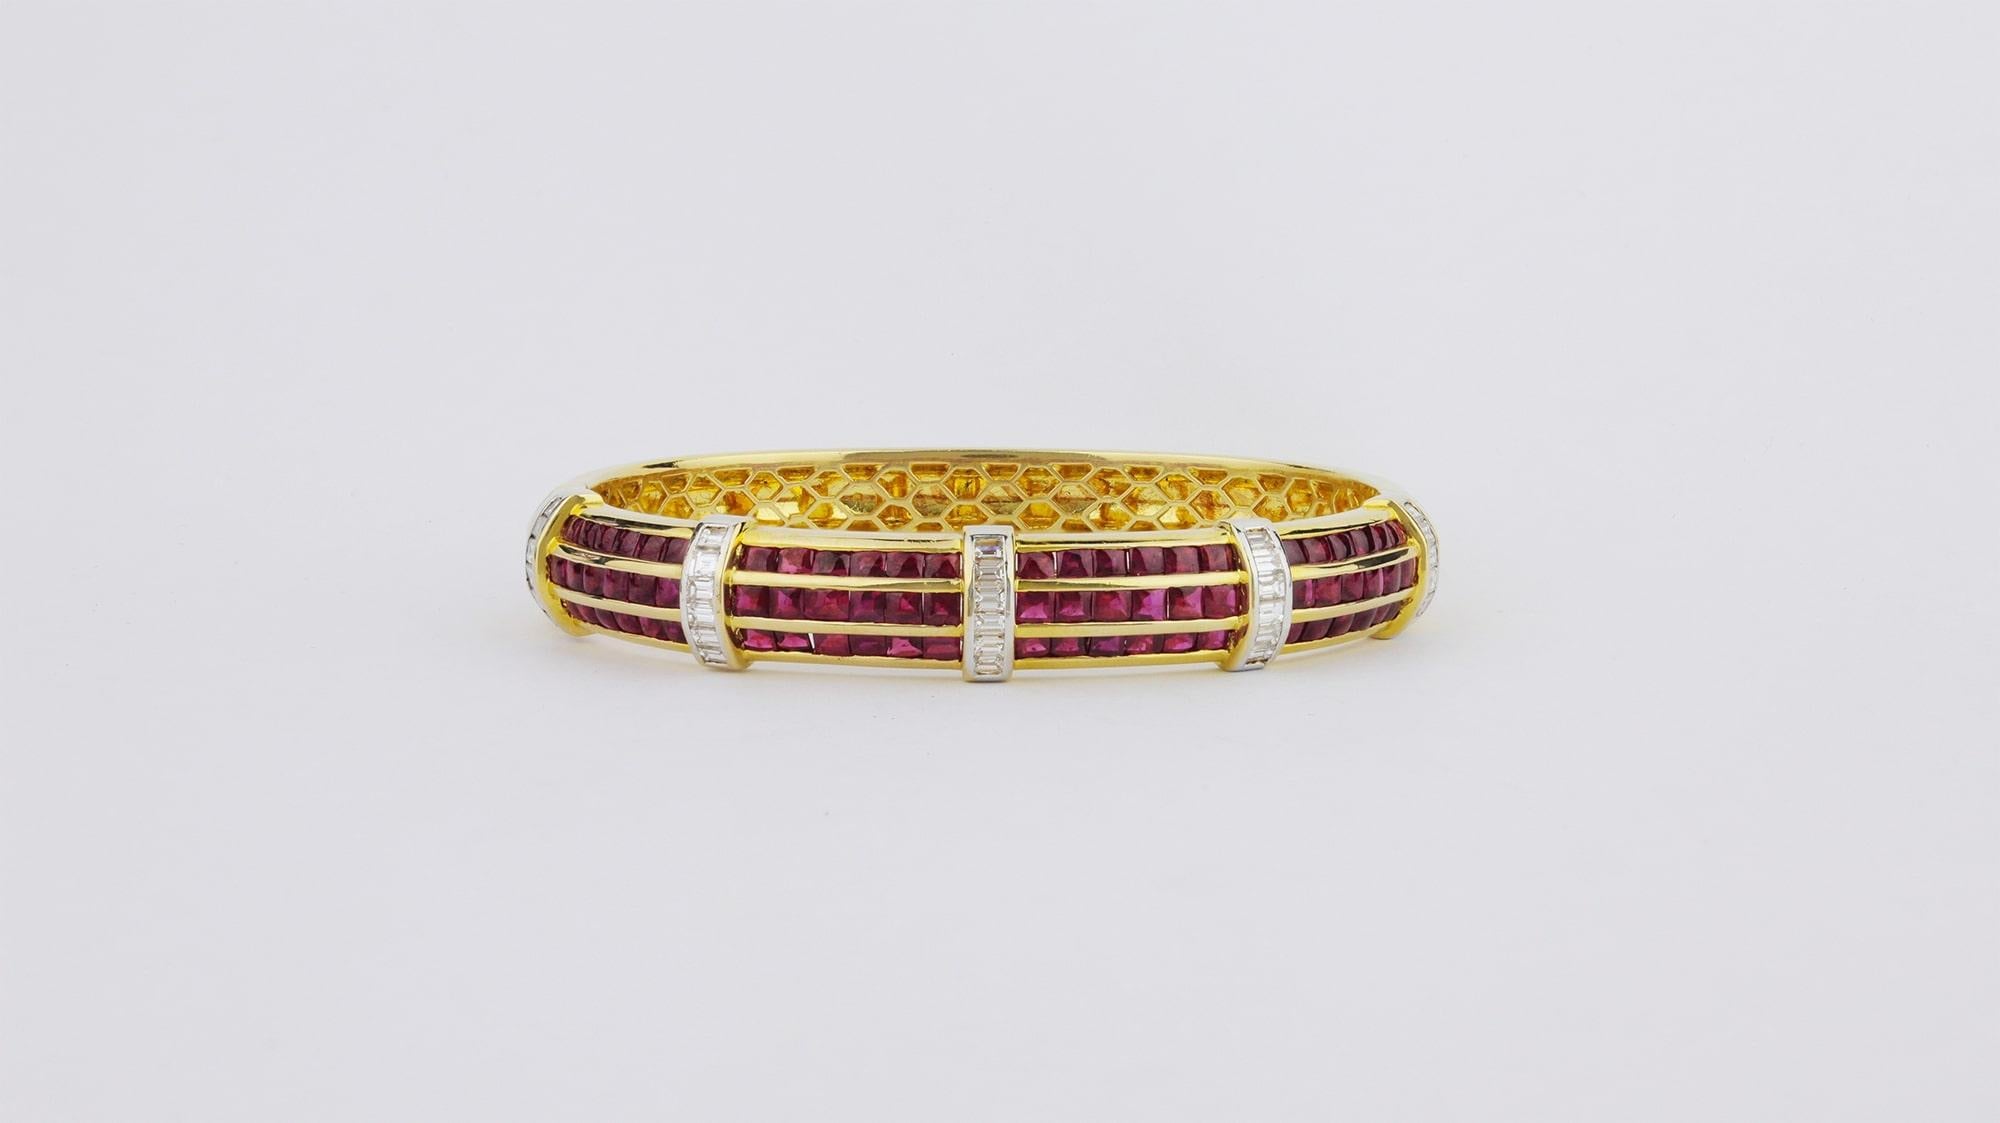 An exceptional ruby and diamond hinged bangle in 18kt yellow gold. Comprising of four panels of three rows of channel set square cabochon cut Burmese rubies interrupted by bands of platinum set baguette cut diamonds. The piece clasps with a tongue